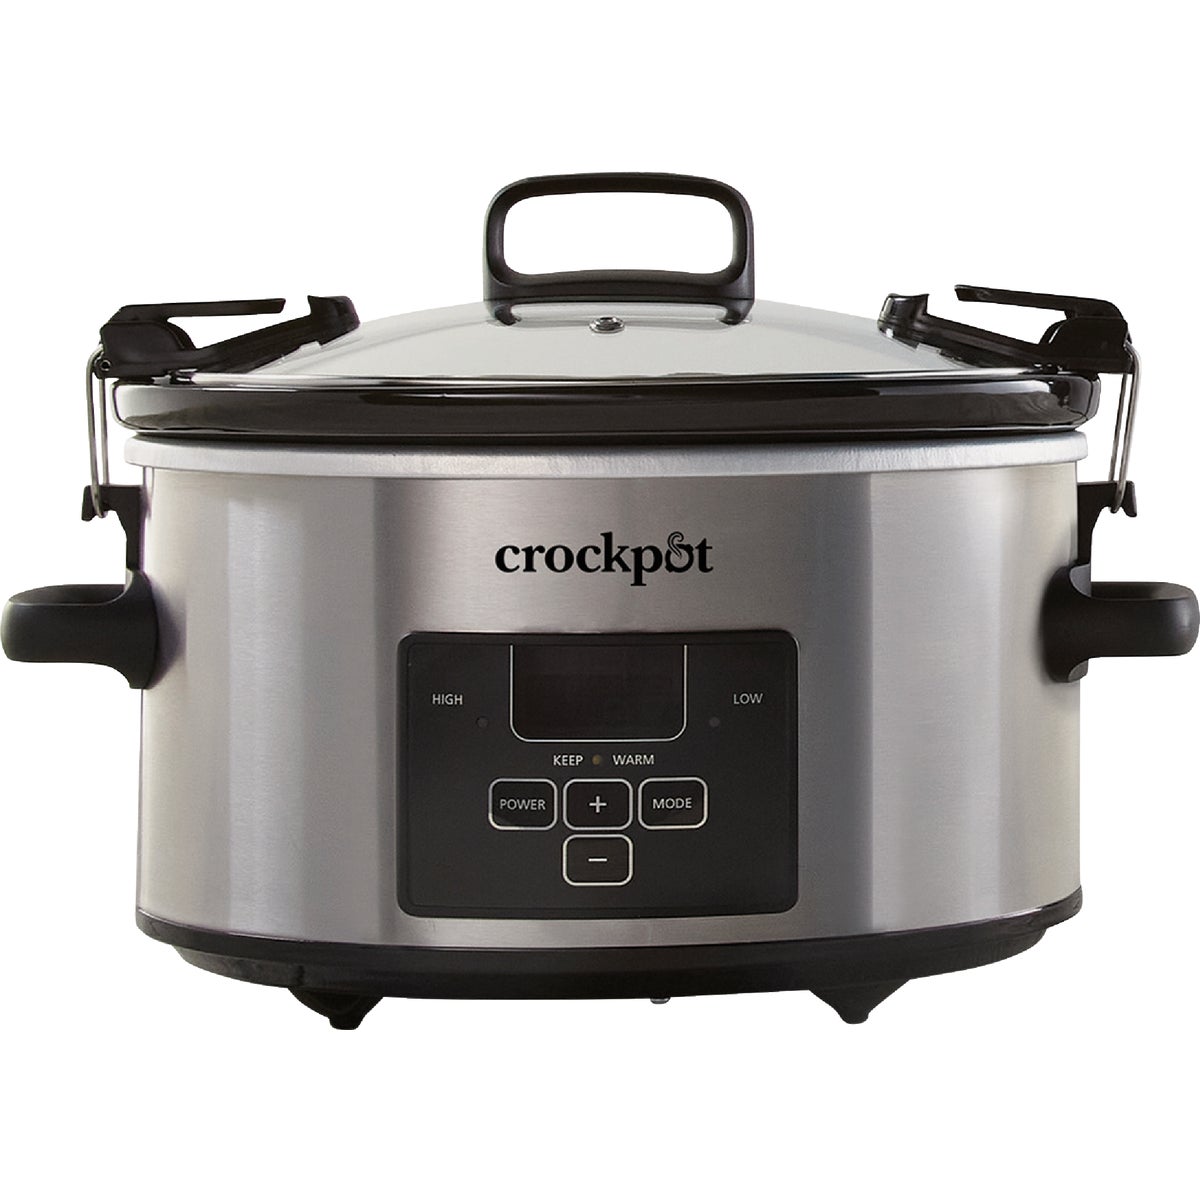 Crockpot 4 Qt. Cook & Carry Stainless Steel Slow Cooker